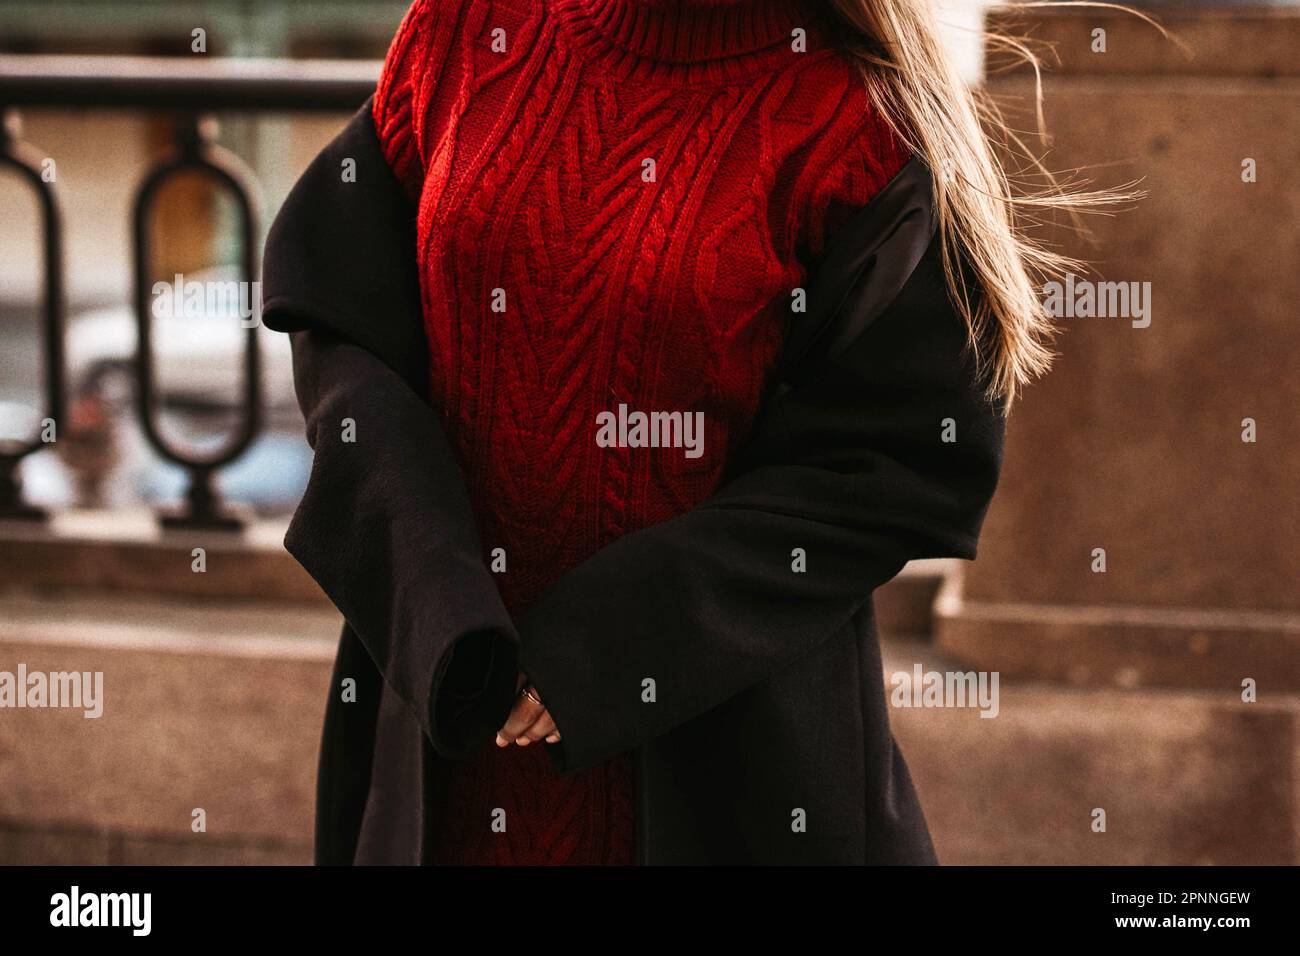 Female body in the red warm knitted sweater and black long coat. Outdoor portrait in daylight. Autumn winter street style cloth concept Stock Photo